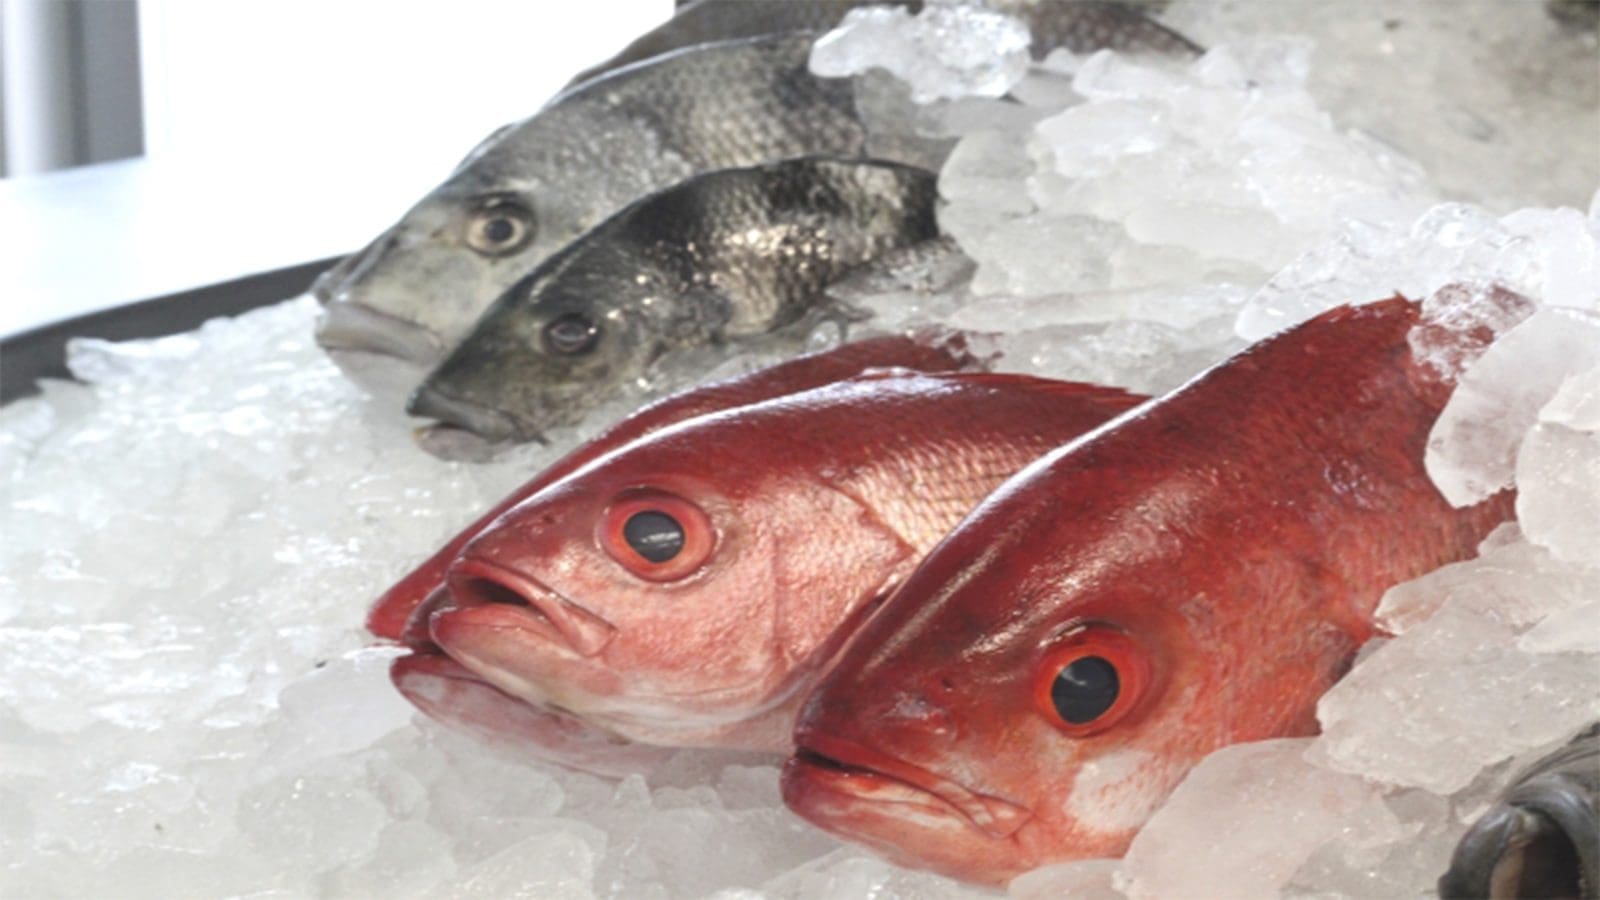 SA launches standards for chilled finfish, marine molluscs, crustaceans